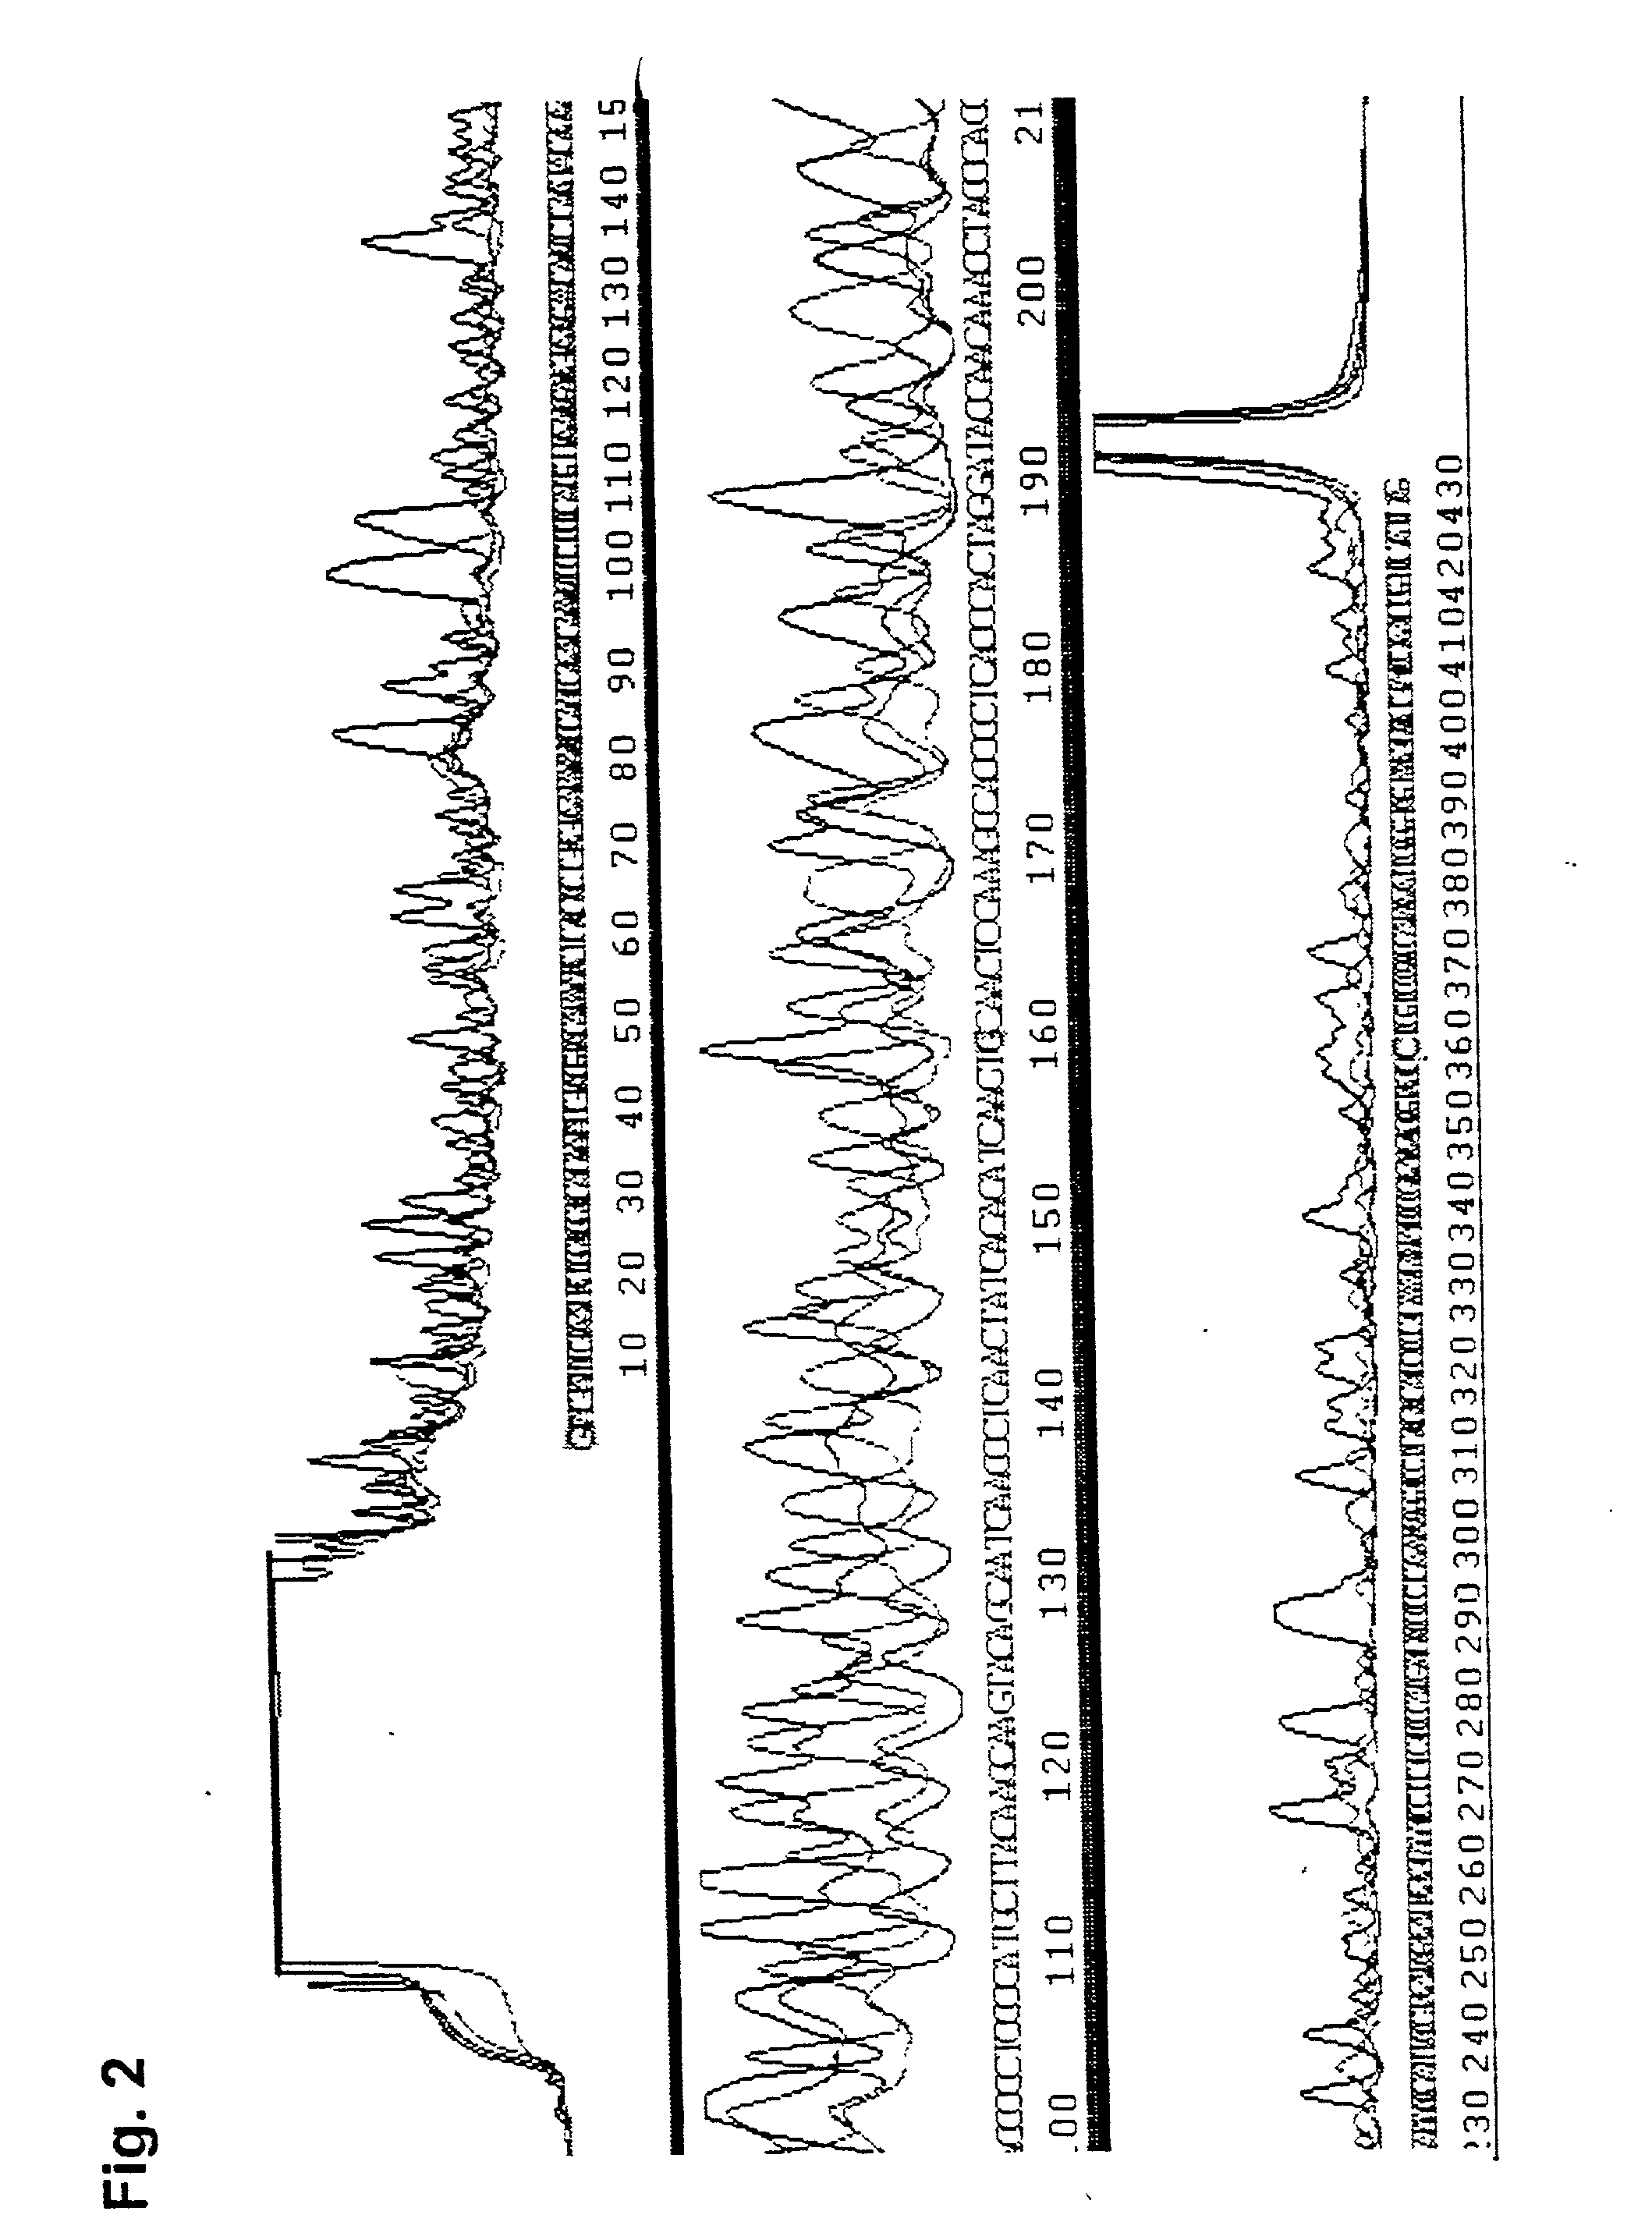 Method for the direct, exponential amplification and sequencing of DNA molecules and its application